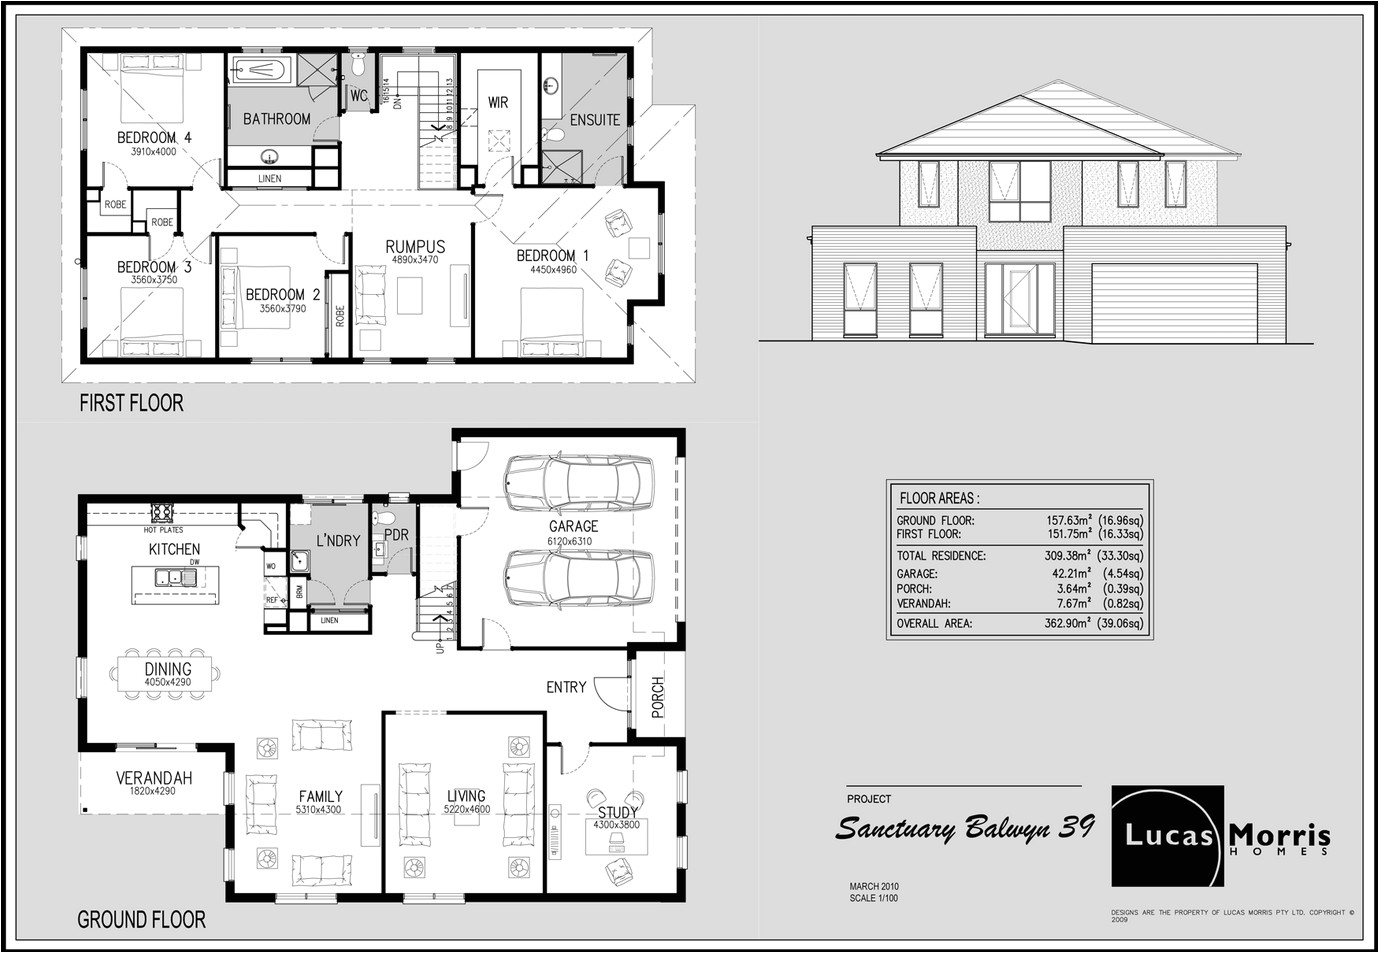 Free Floor Plans for Homes Design Your Own Floor Plan Free Deentight